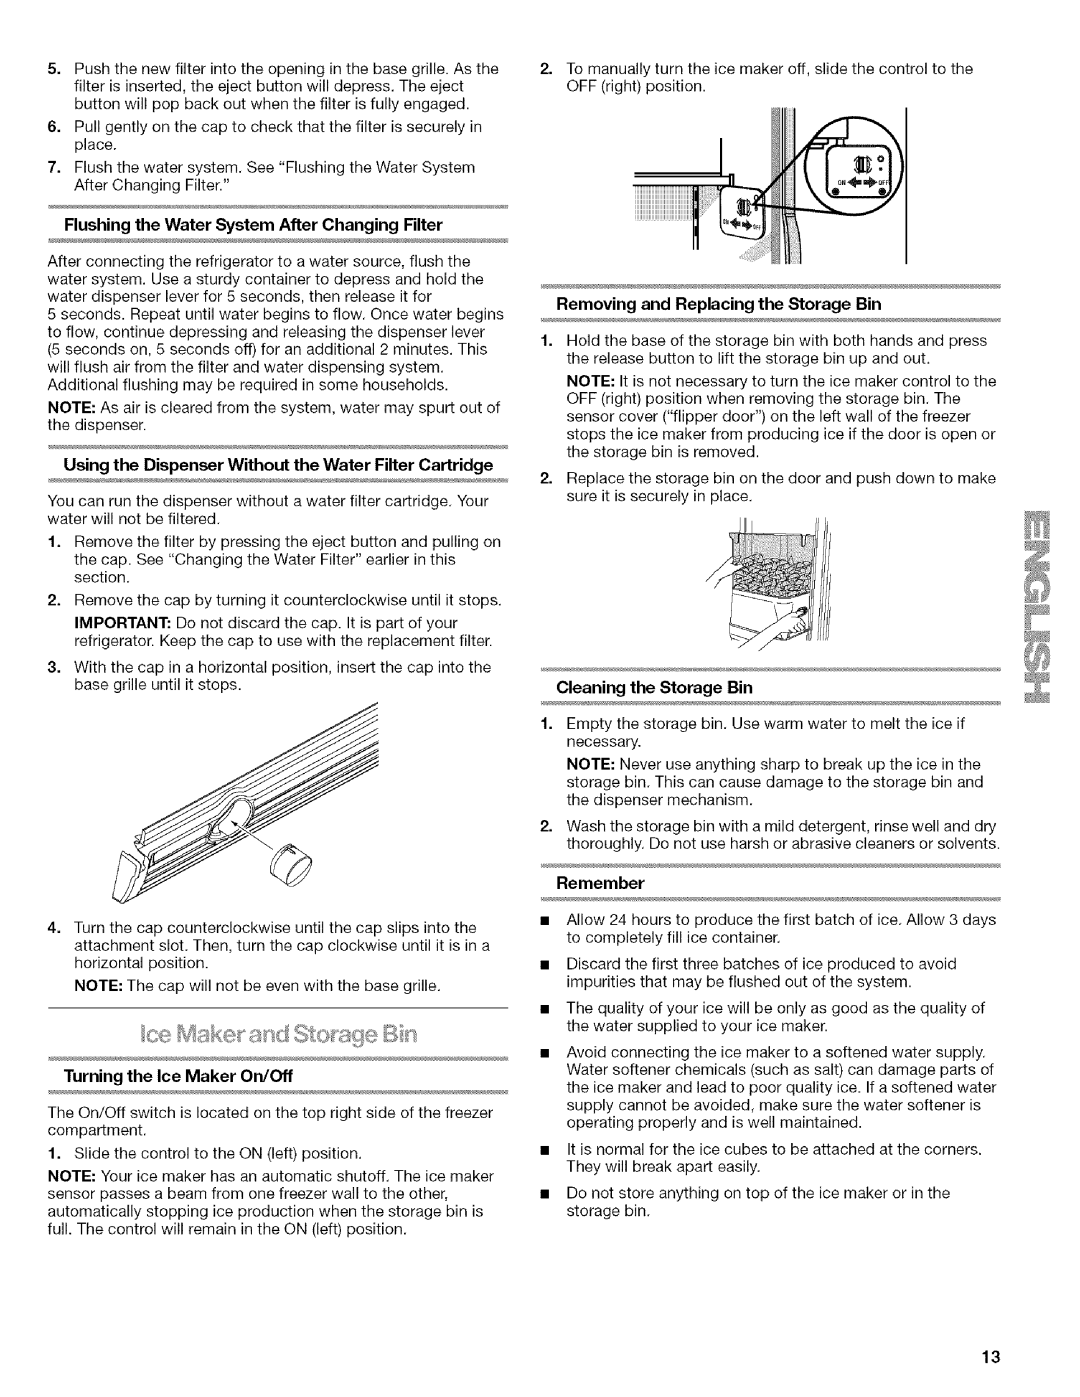 Kenmore WI0151336A manual c> aije, Removing and Replacing the Storage Bin, Cleaning the Storage Bin, Remember 